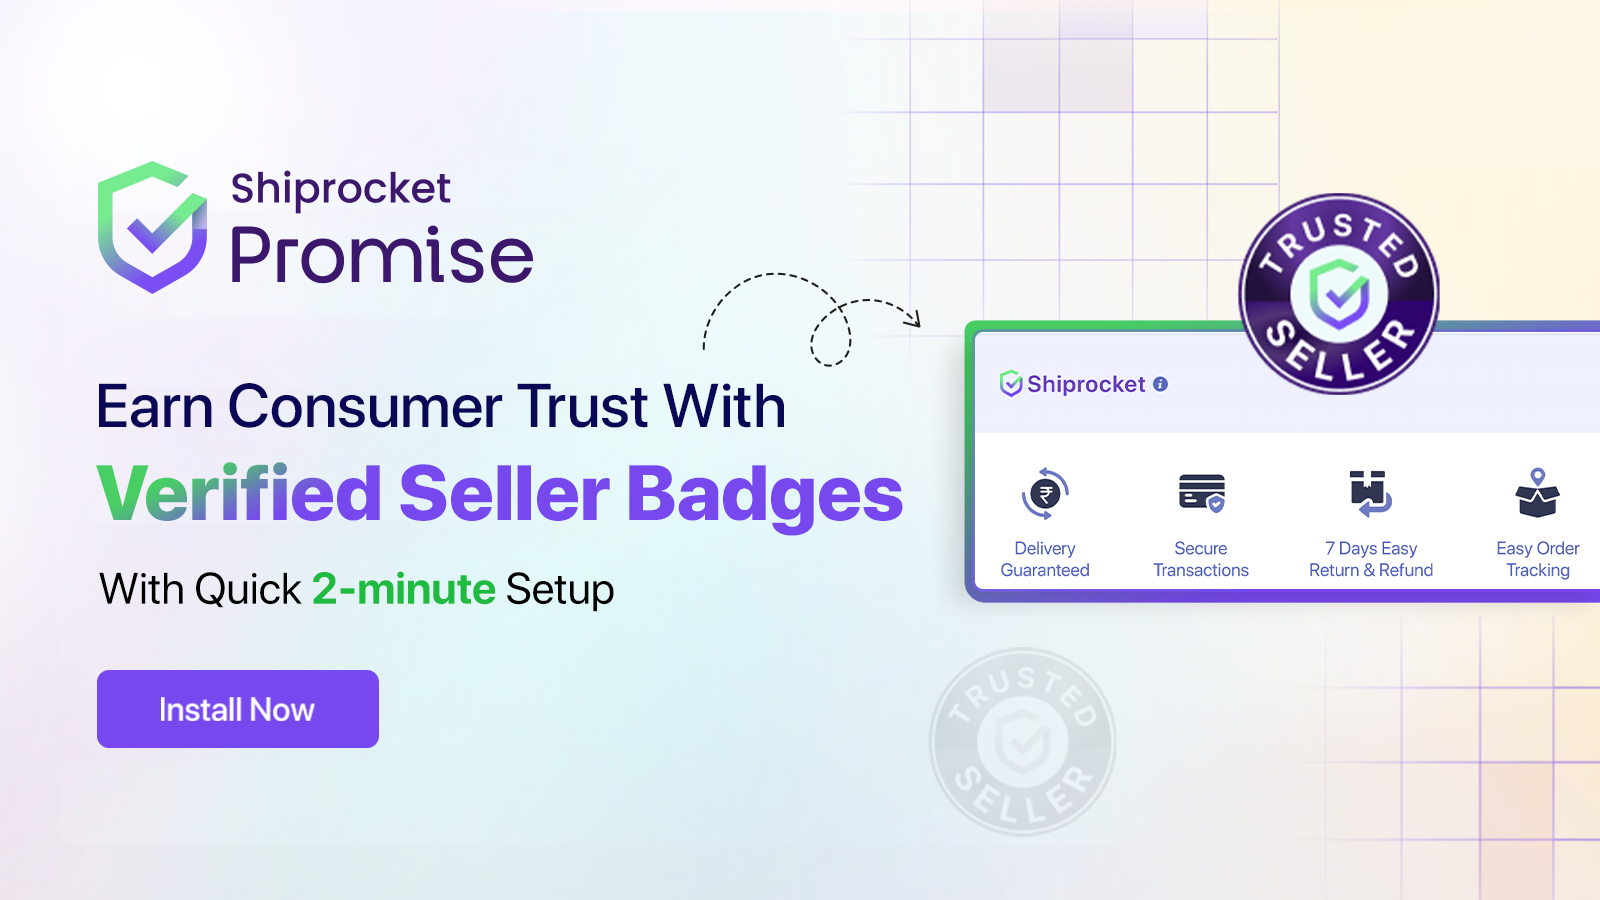 Increase conversion by showcasing trust badges